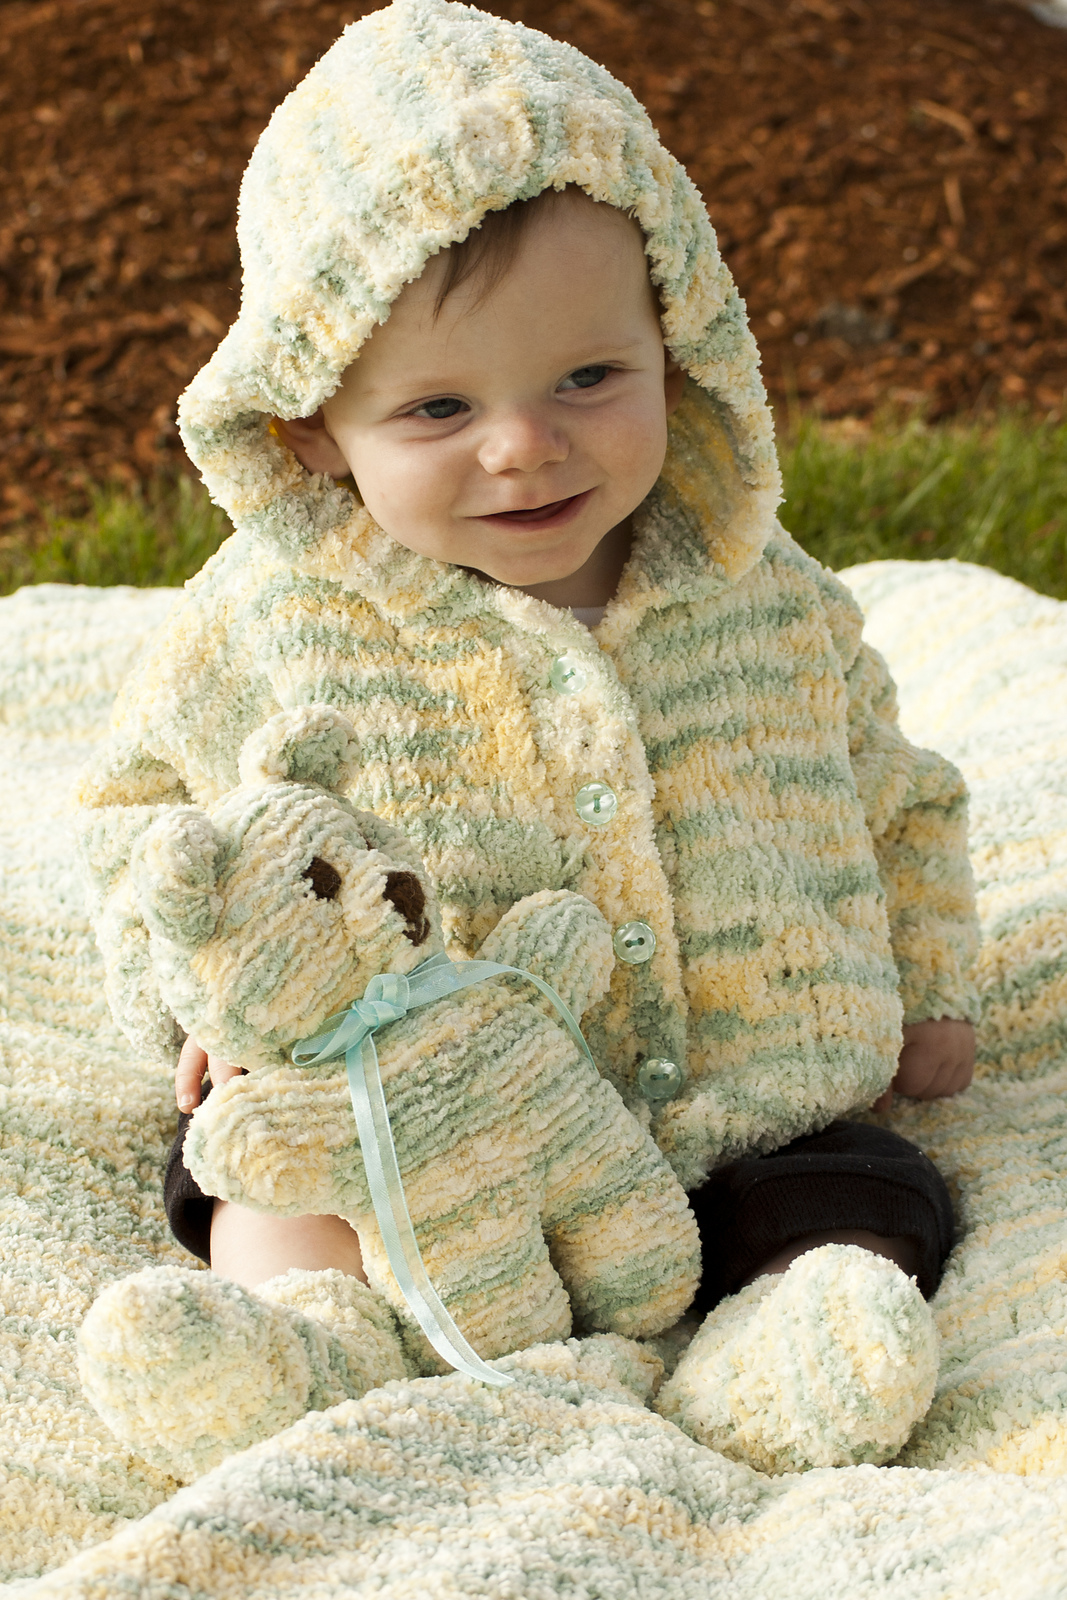 Baby Set Knitting Patterns | In the Loop Knitting